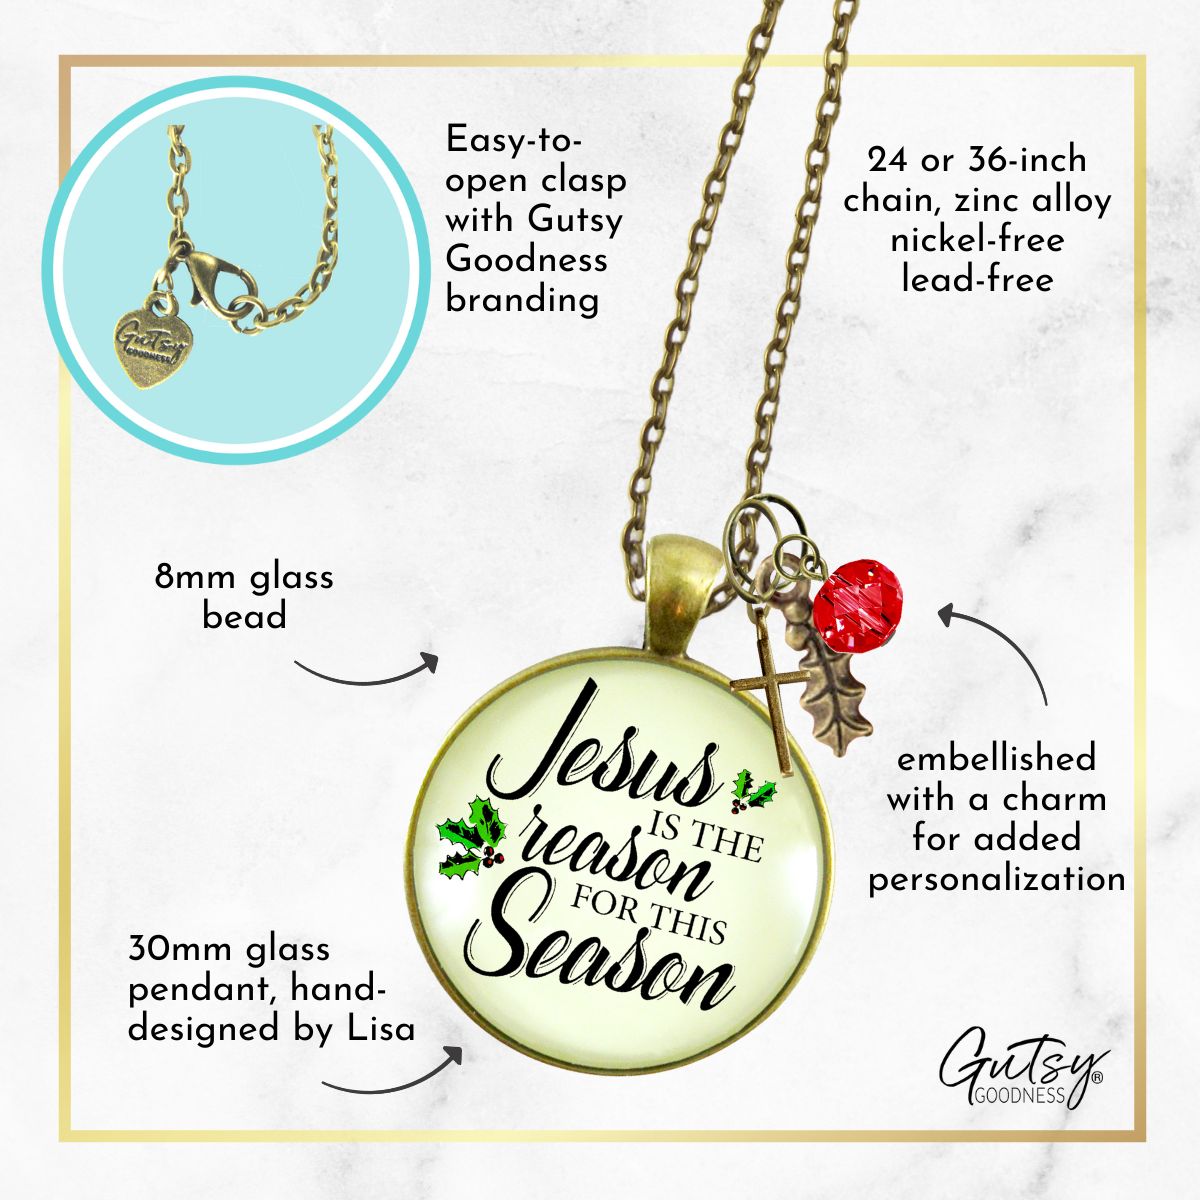 Jesus Is The Reason Necklace Merry Christmas Handmade Faith Jewelry Gift For Women Cross Holly Charms  Necklace - Gutsy Goodness Handmade Jewelry